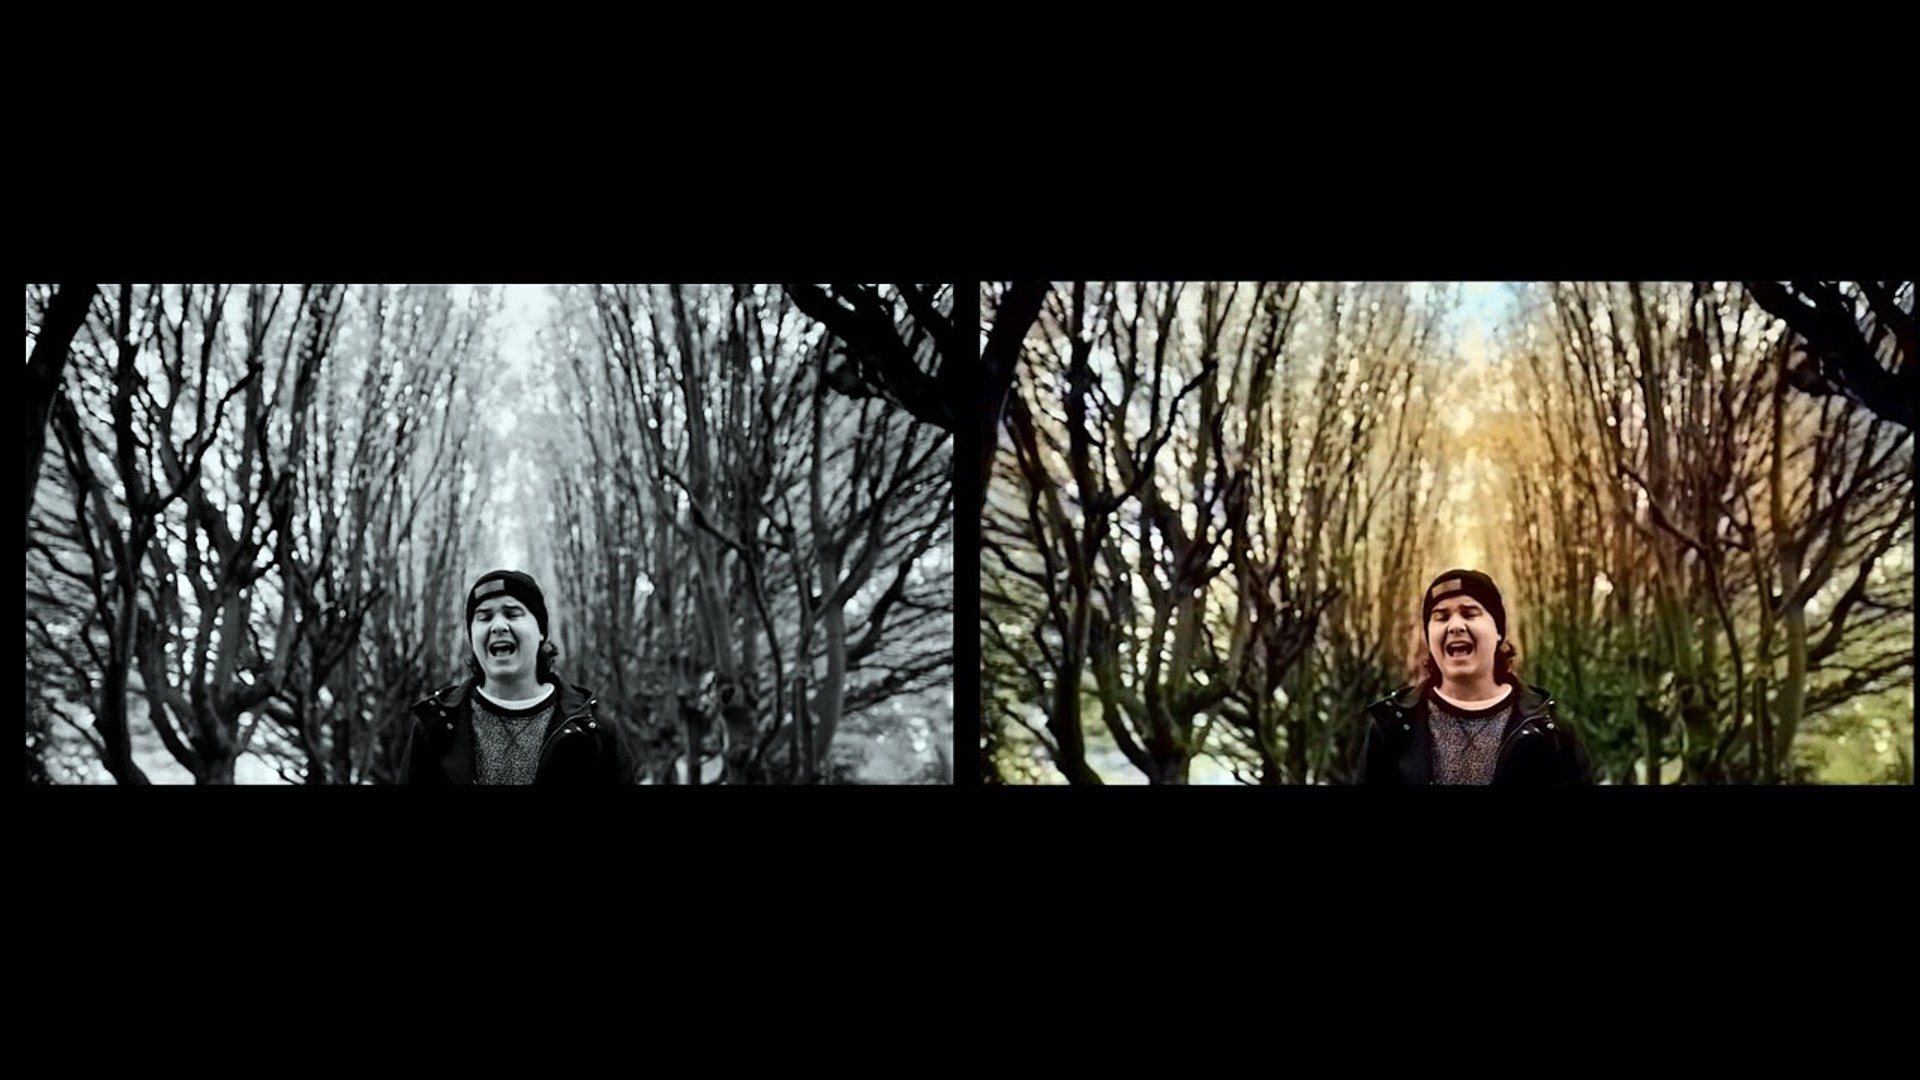 Automatic video colorization using deep learning for Lukas Graham's 7 years